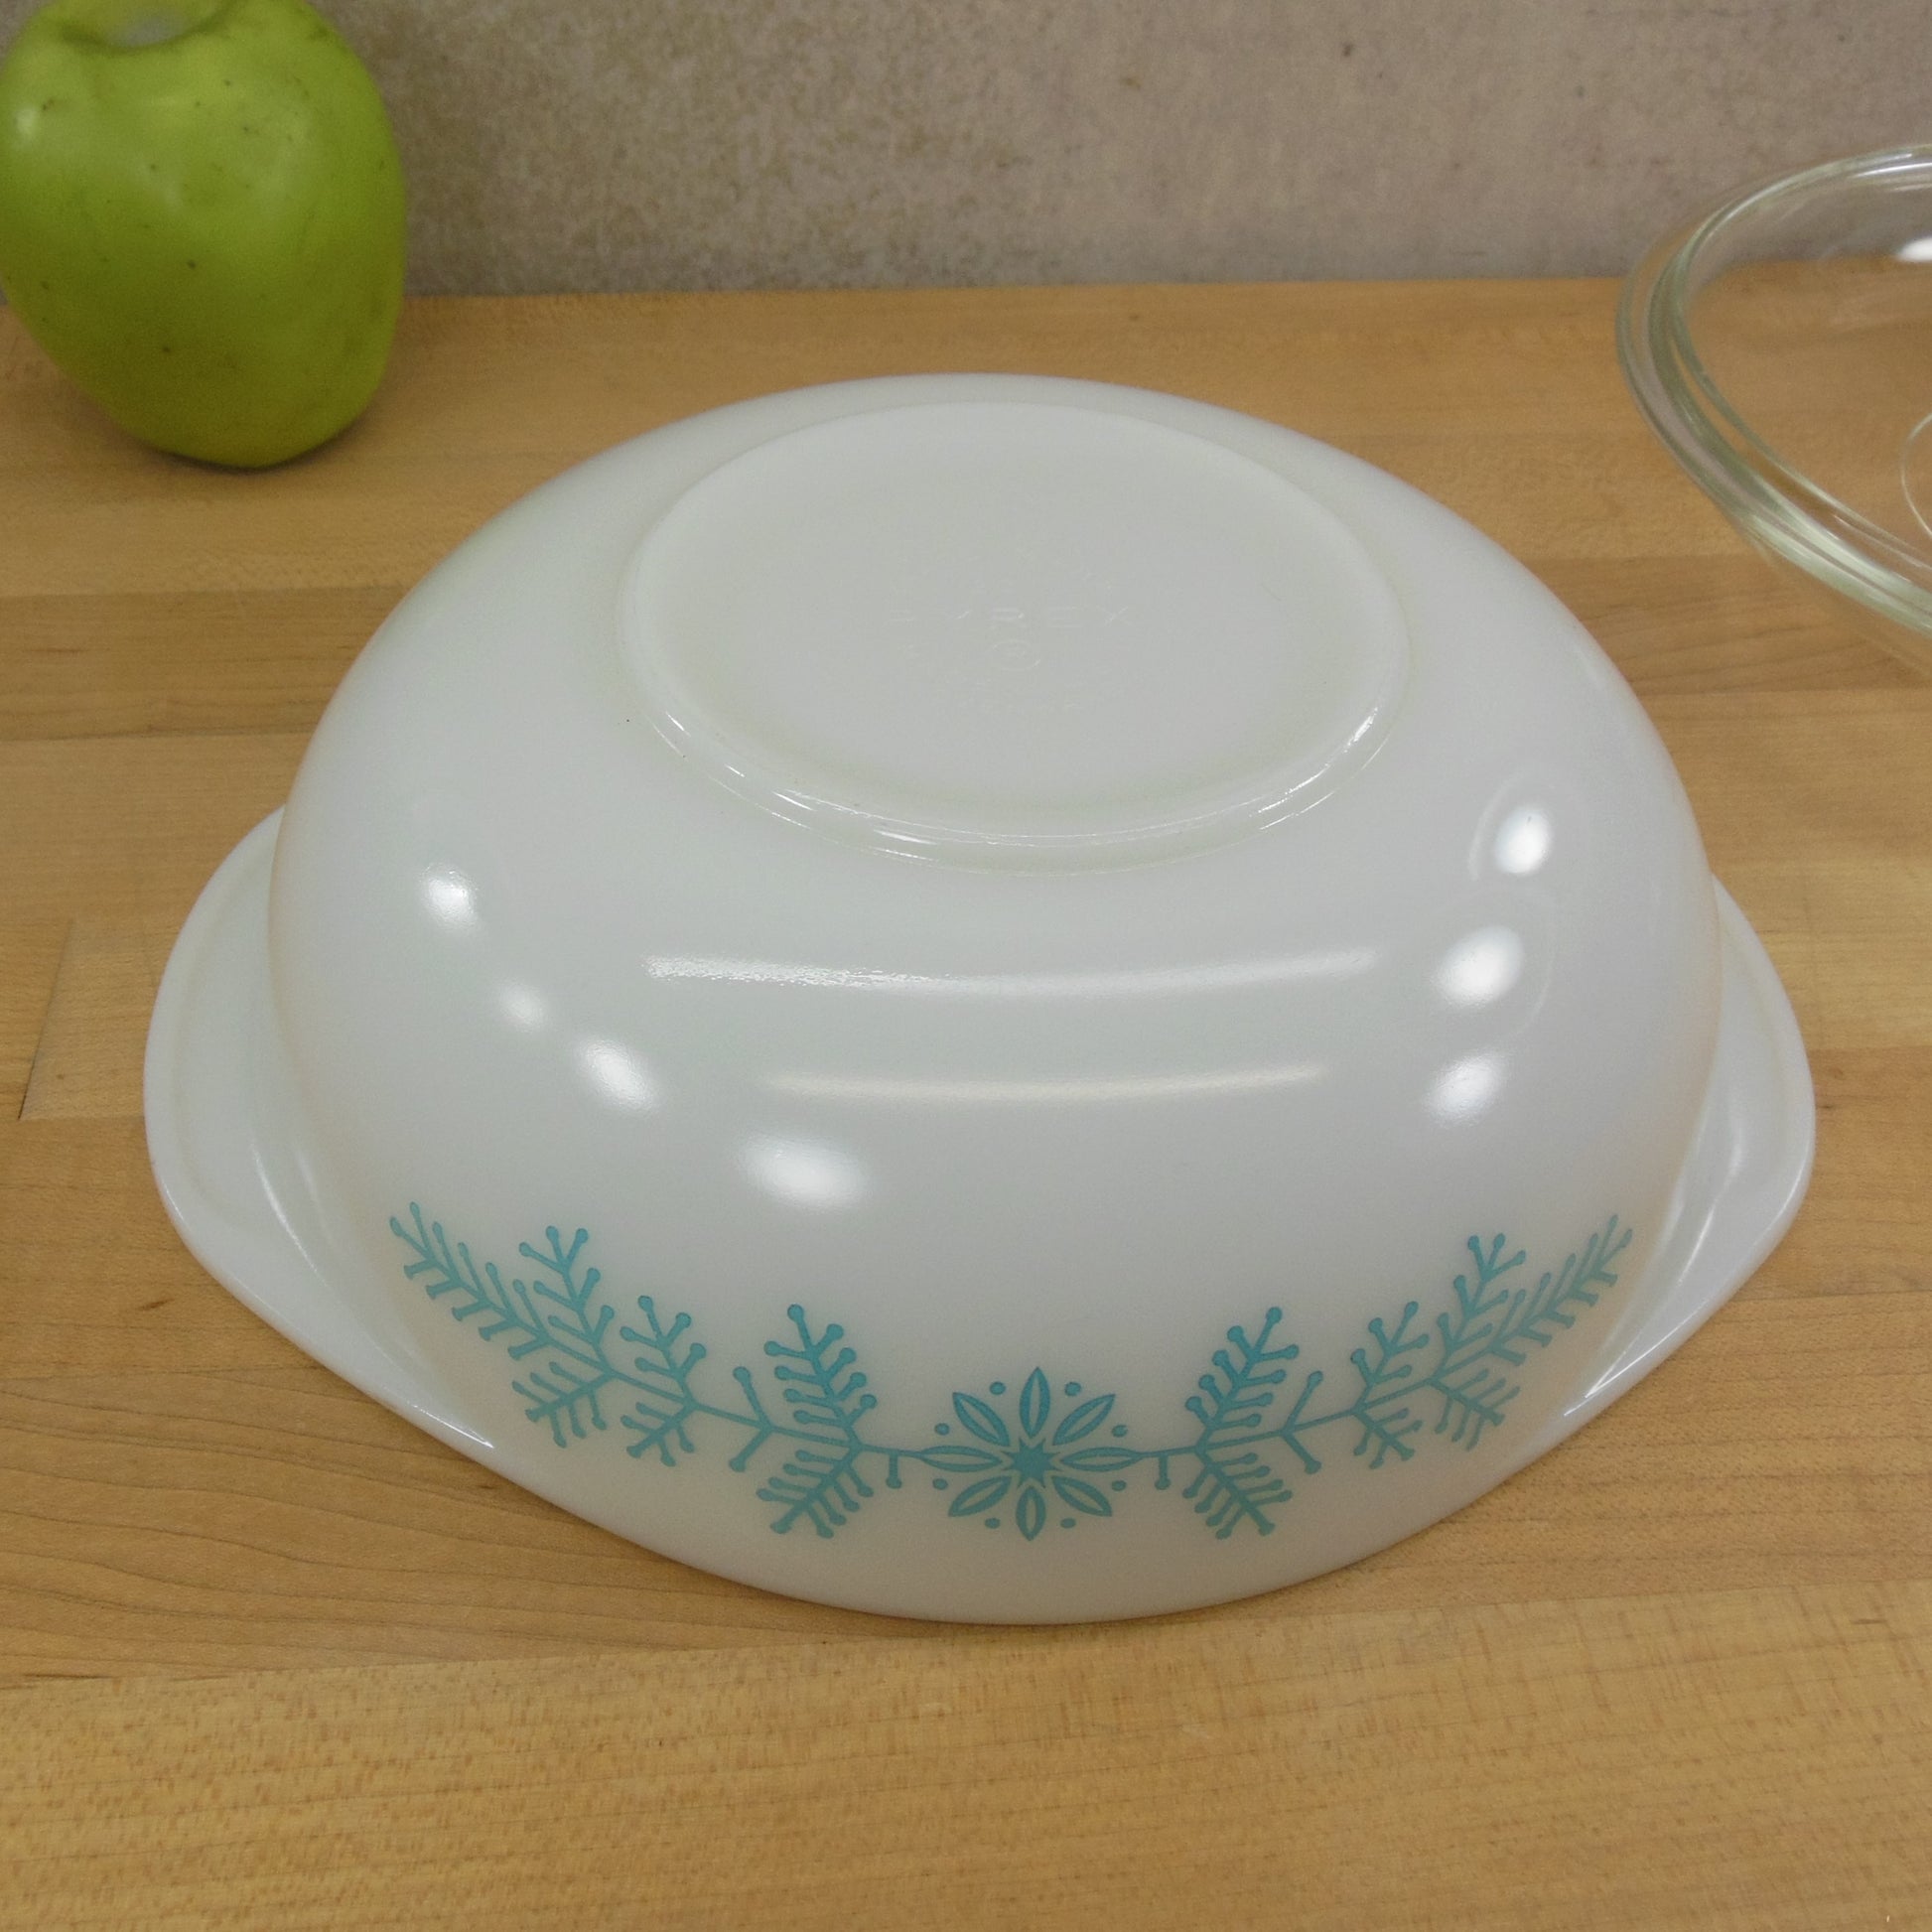 Pyrex Glass USA 1962 Promotional Casserole Dish & Lid Frost Garland Turquoise 023